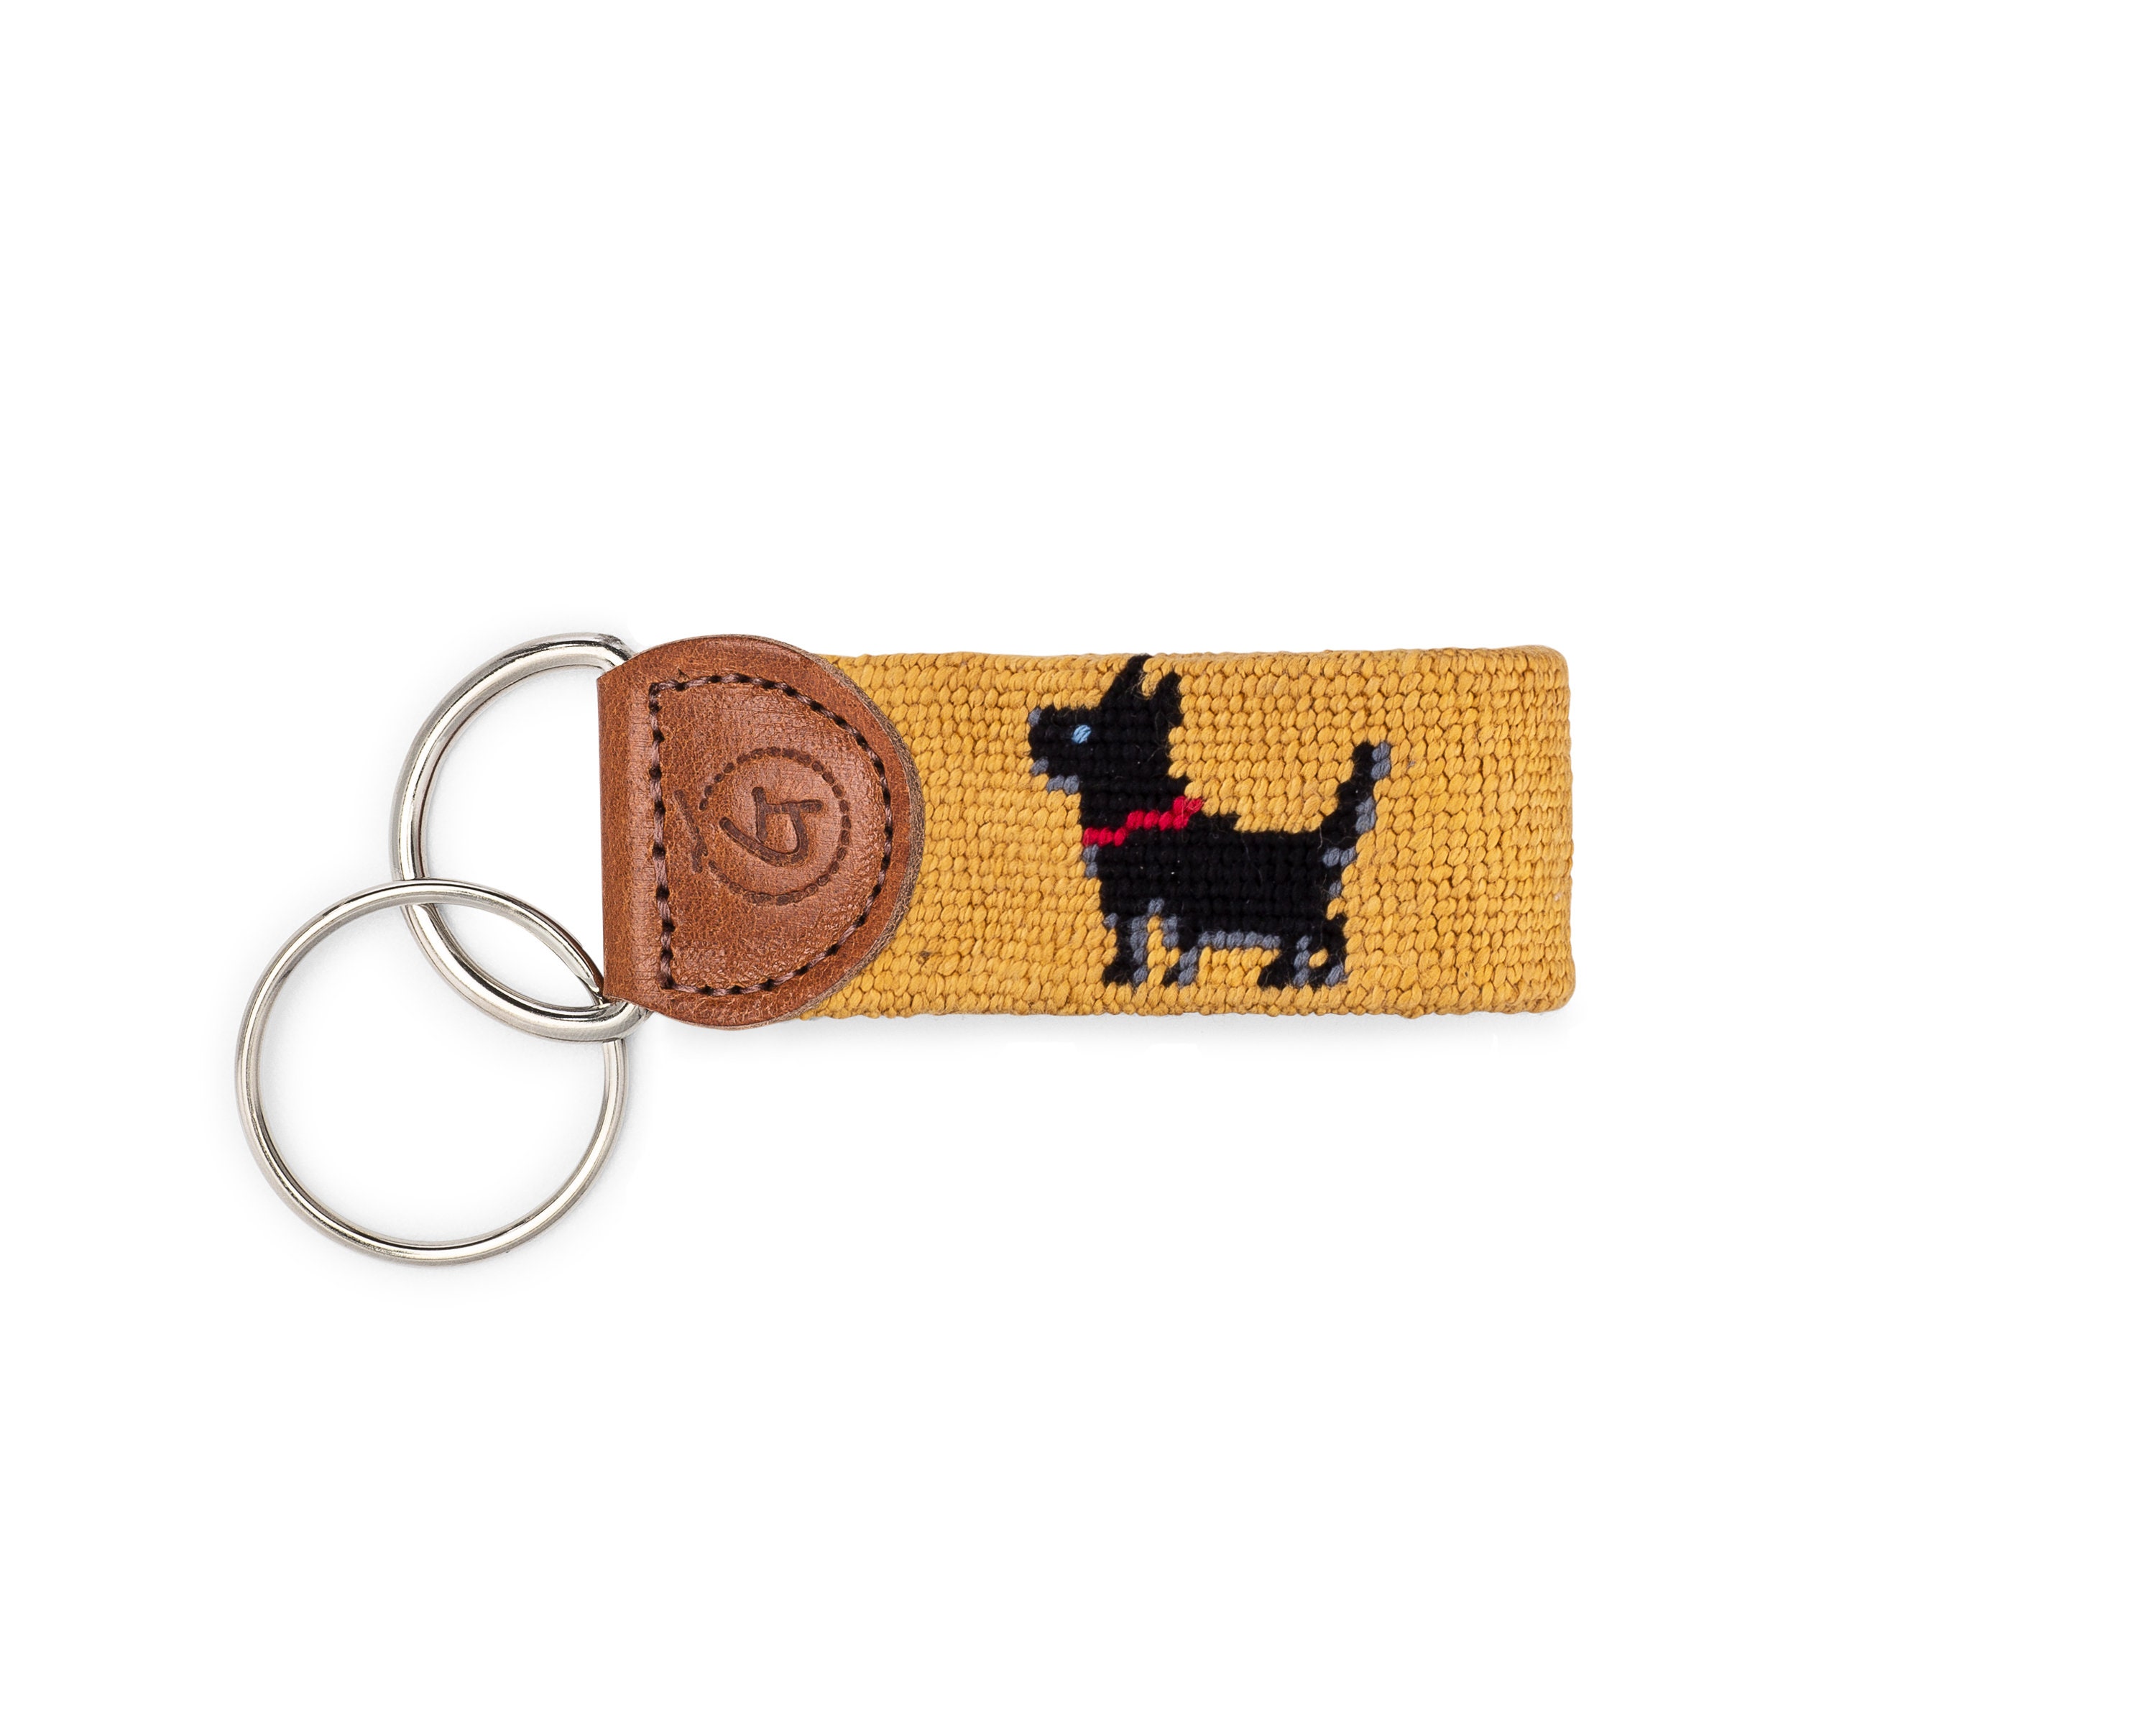 Louis Vuitton K9 puppy dog keychains Review!!!! One of a kind item